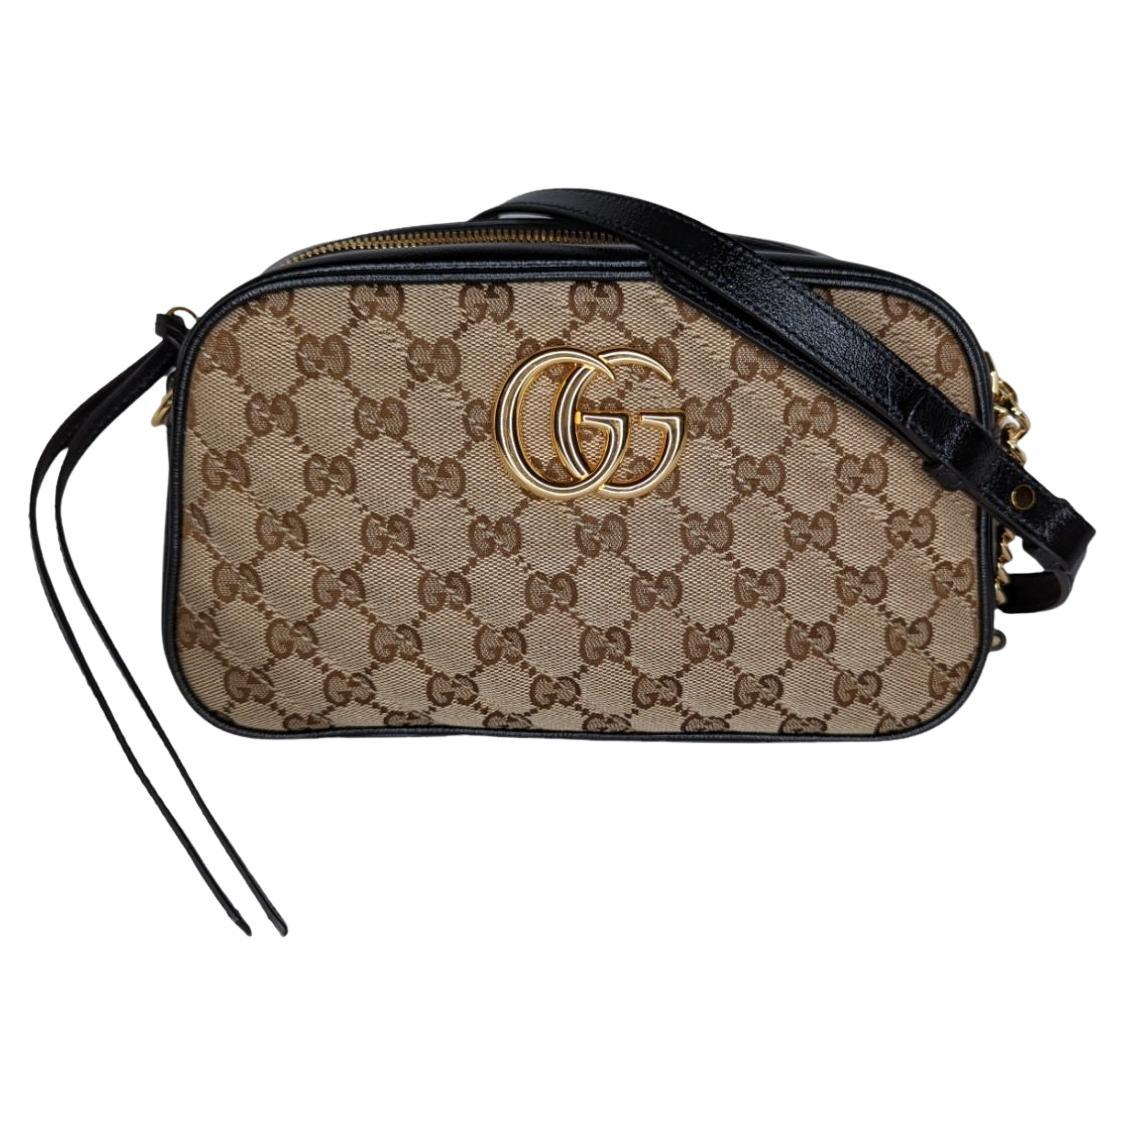 Gucci - Designer Biography and Price History on 1stDibs | 5278, "gucci  handbags" zumi, "gucci" shoes or handbags or suits